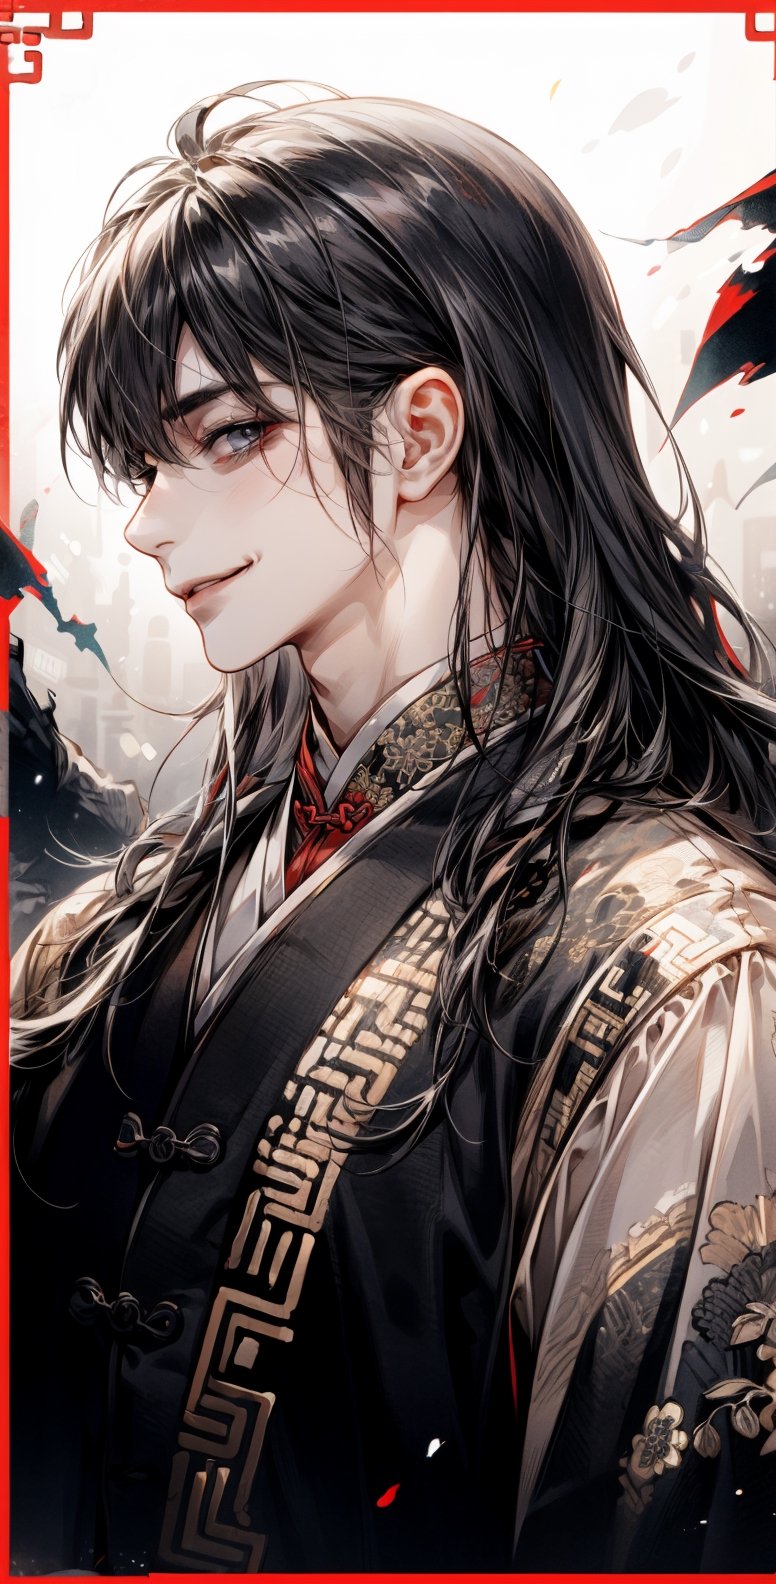 1guy, Black and white traditional chinese_clothes, mullet hair, horror(theme), chin up, looking_at_viewer , slender , side profile, evil smile, mandala effect